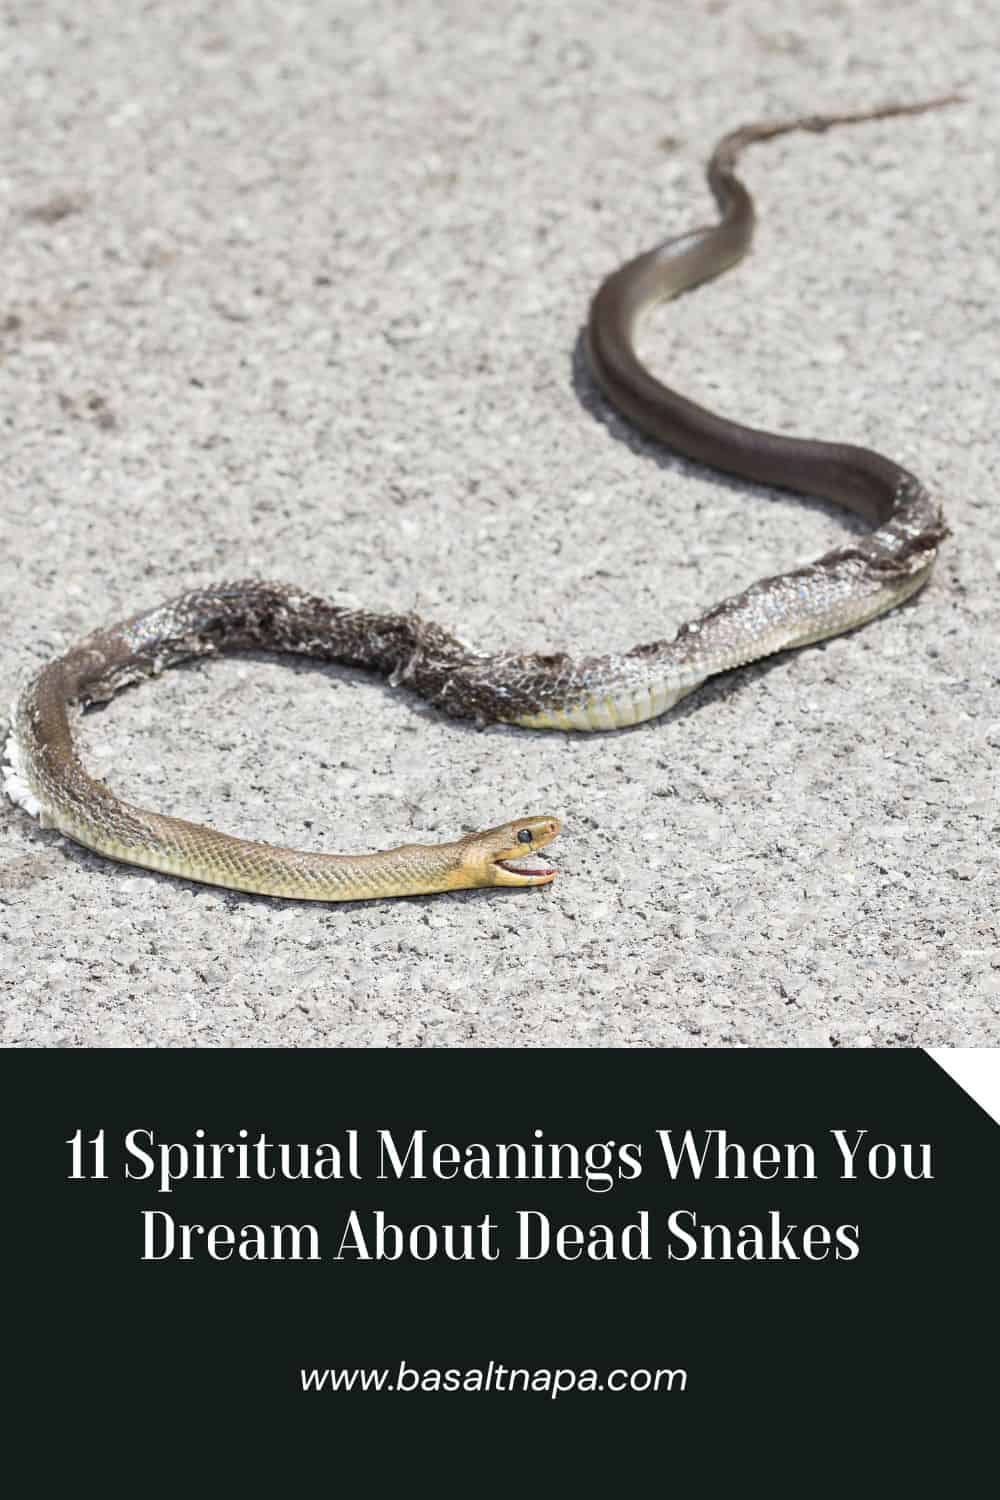 Spiritual Meanings of Dead Snakes in Dreams